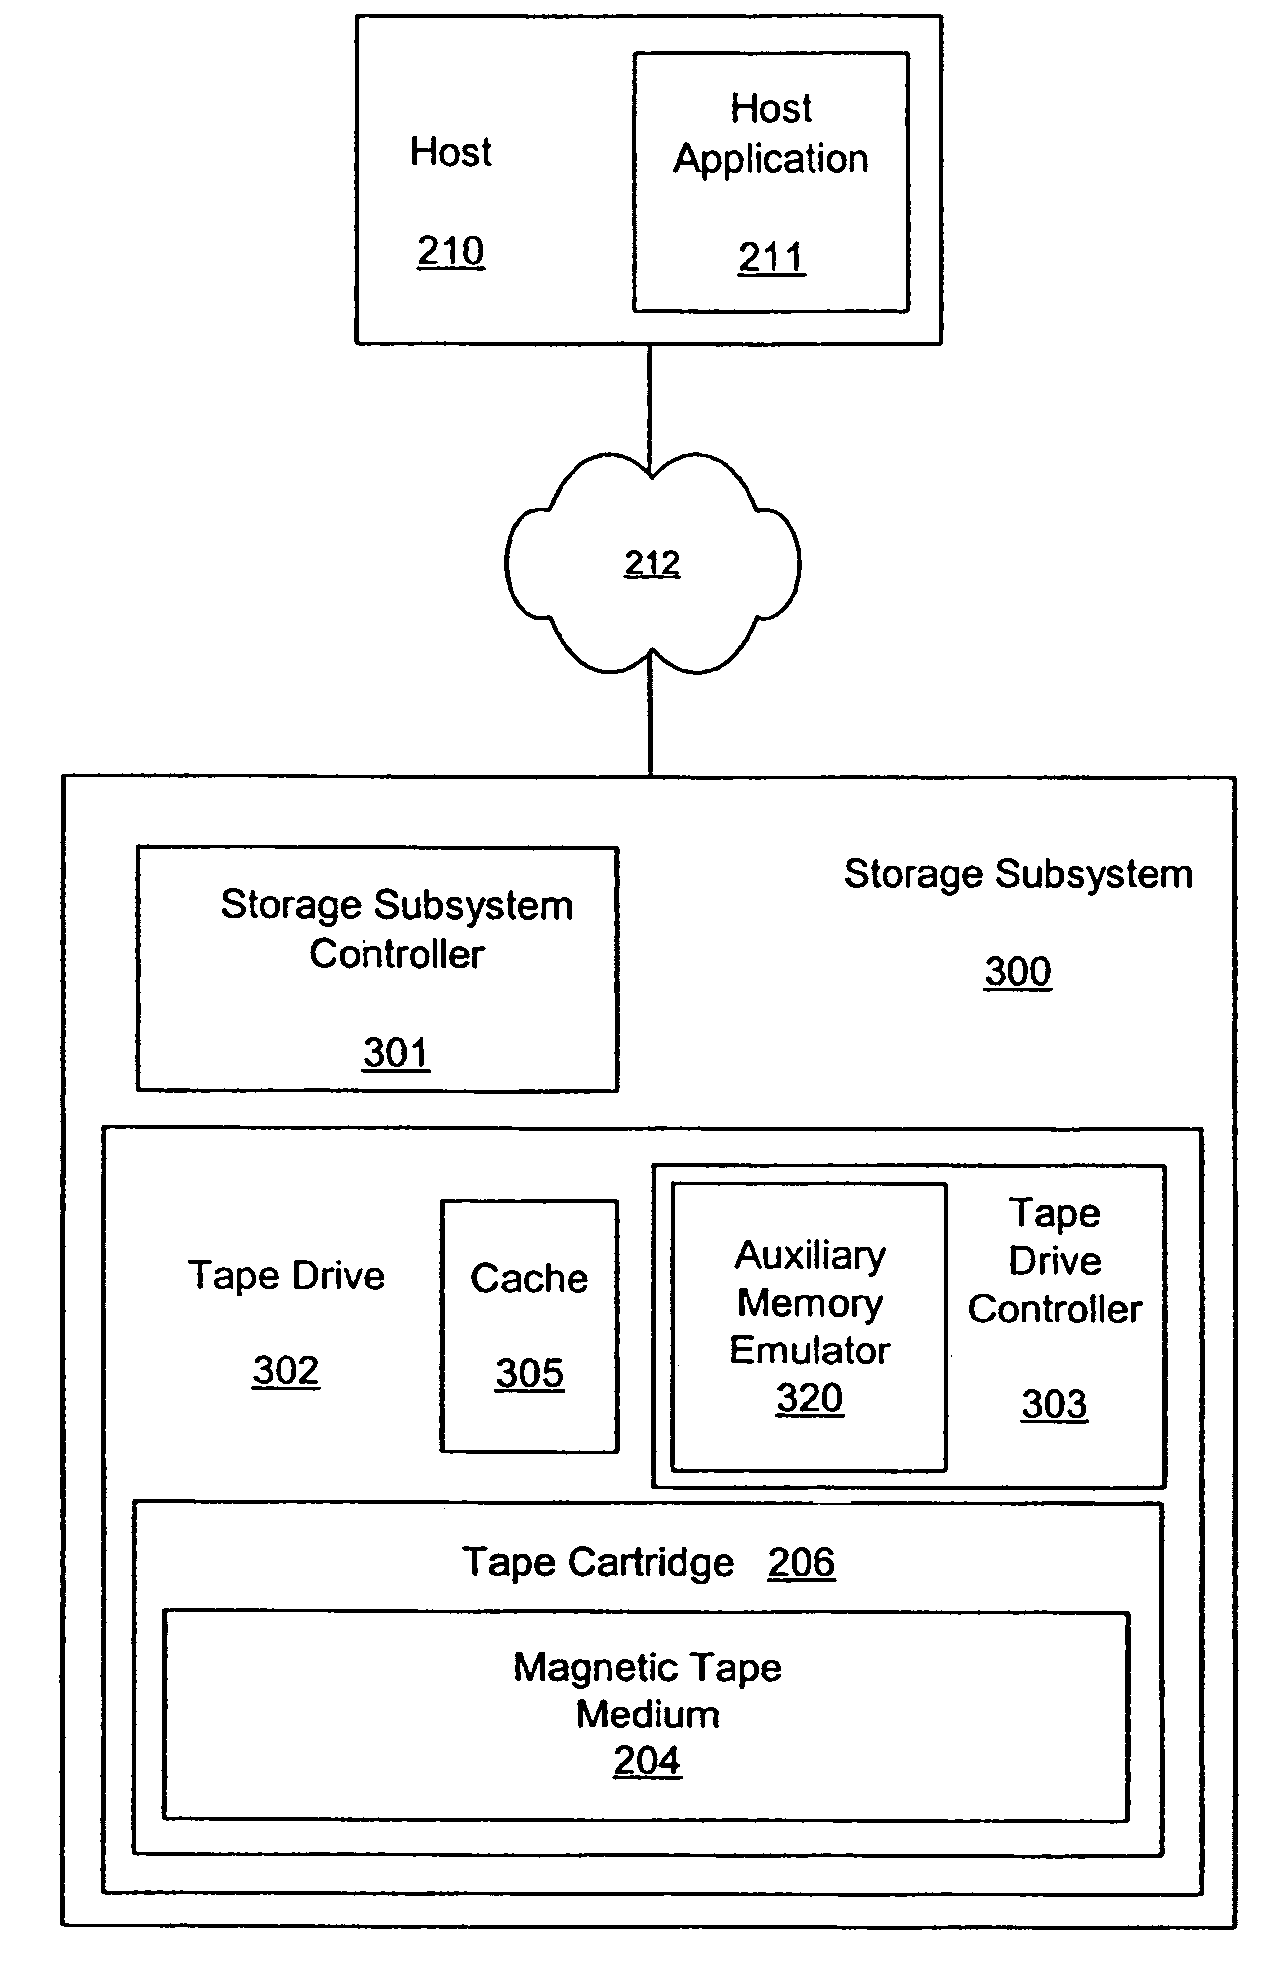 Emulation of auxiliary memory